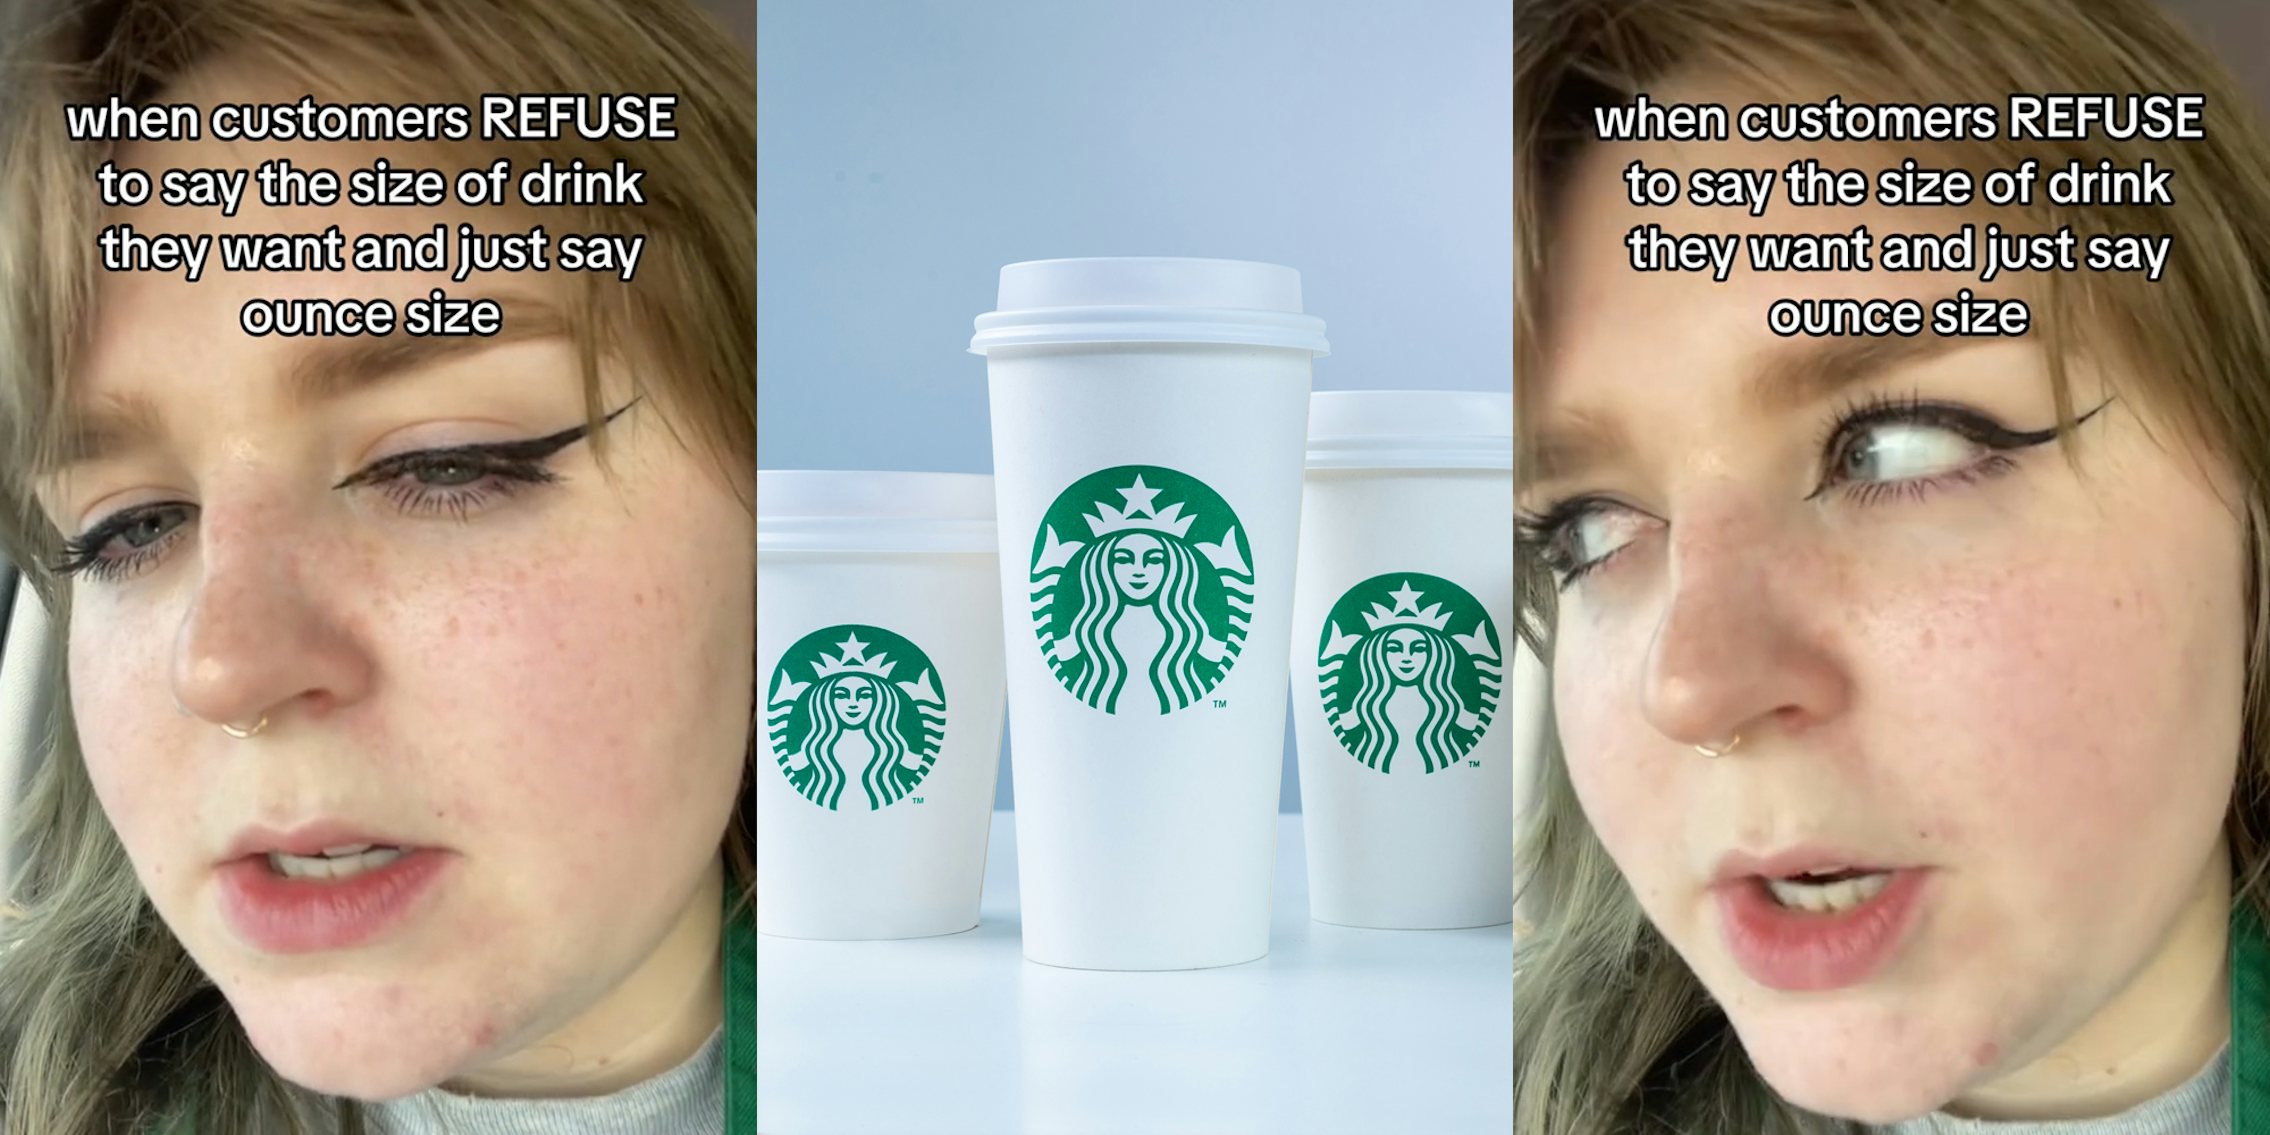 Starbucks barista with caption 'when customers REFUSE to say the size of drink they want and just say ounce size' (l) Starbucks different sized cups in front of light blue background (c) Starbucks barista with caption 'when customers REFUSE to say the size of drink they want and just say ounce size' (r)